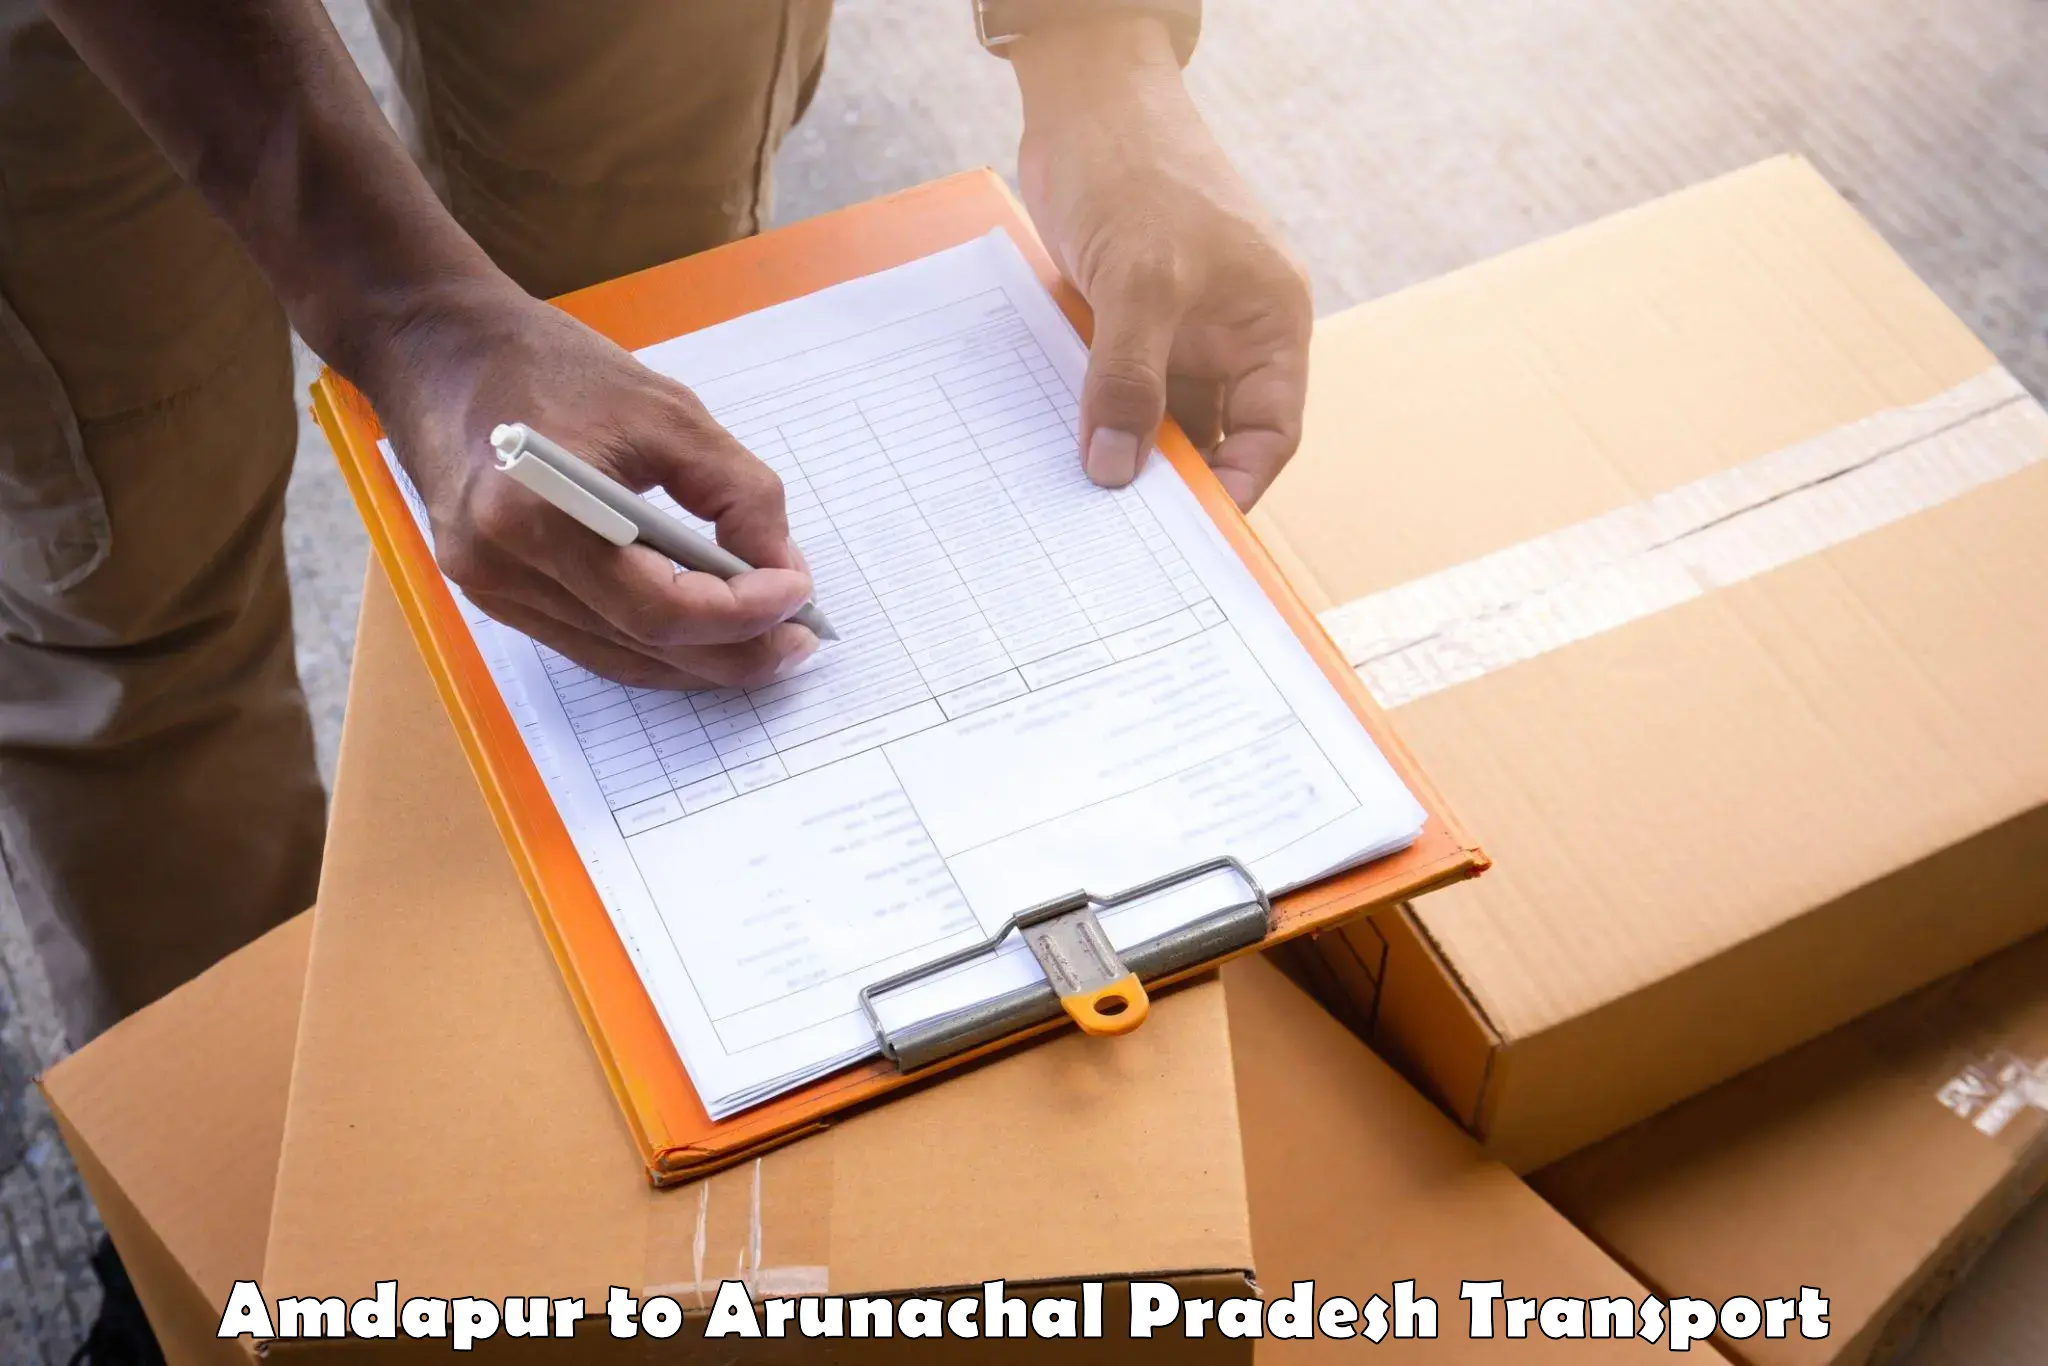 Parcel transport services in Amdapur to Changlang